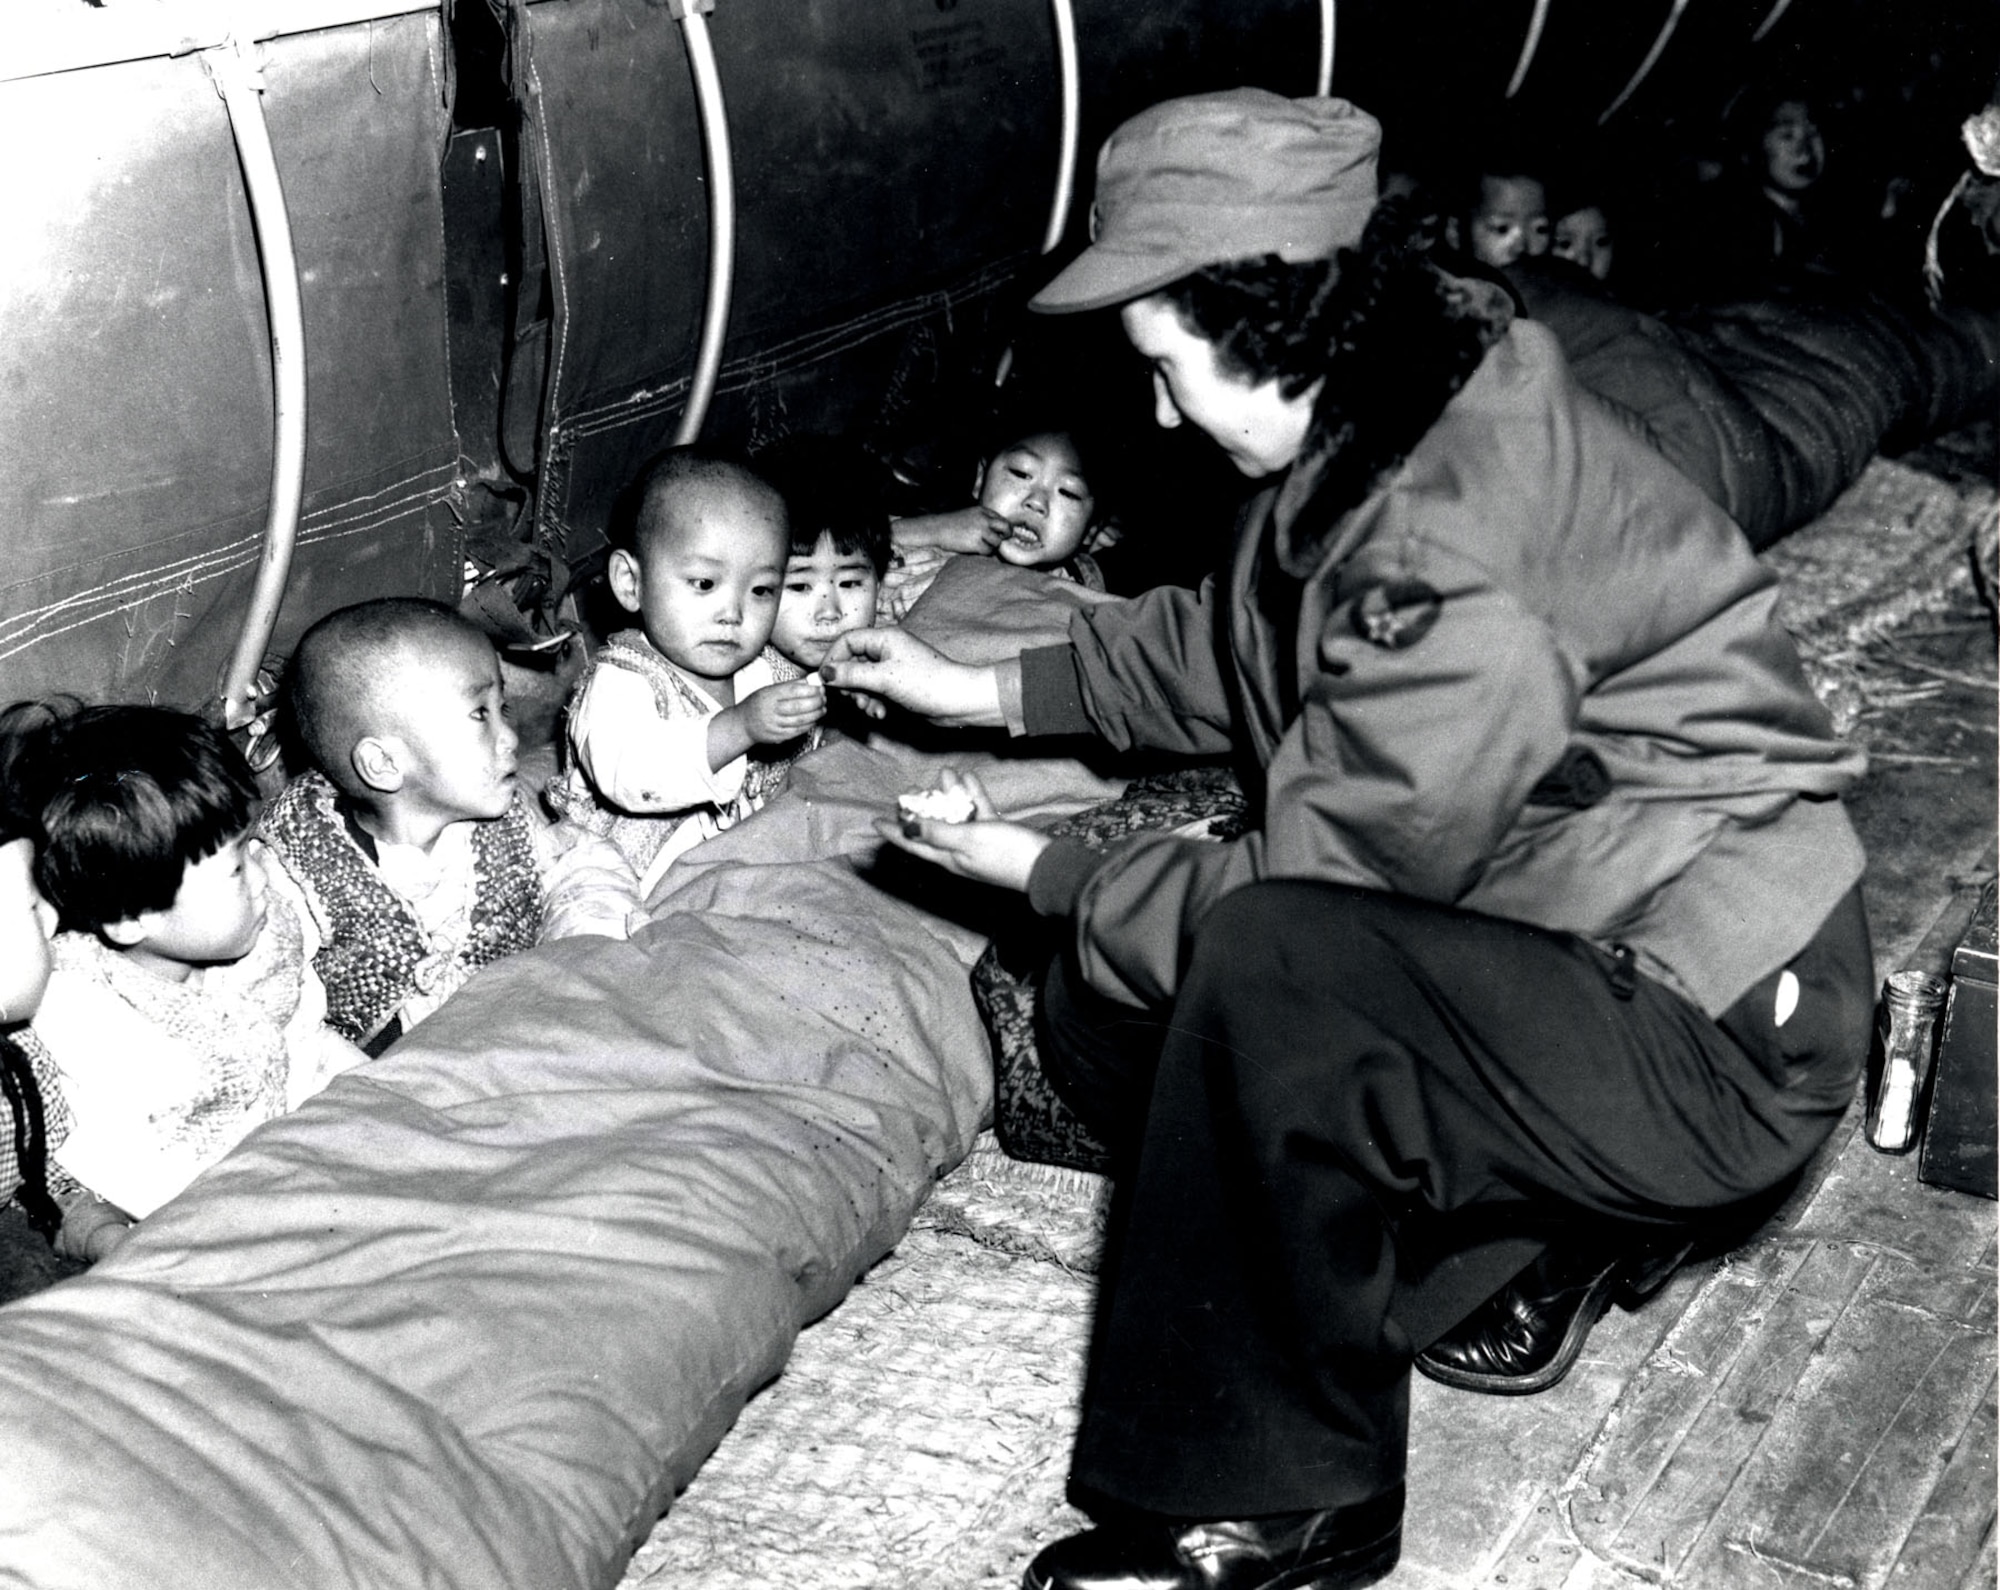 Flight nurse Capt. Mary Spivak hands out candy to orphans during the evacuation. (U.S. Air Force photo)